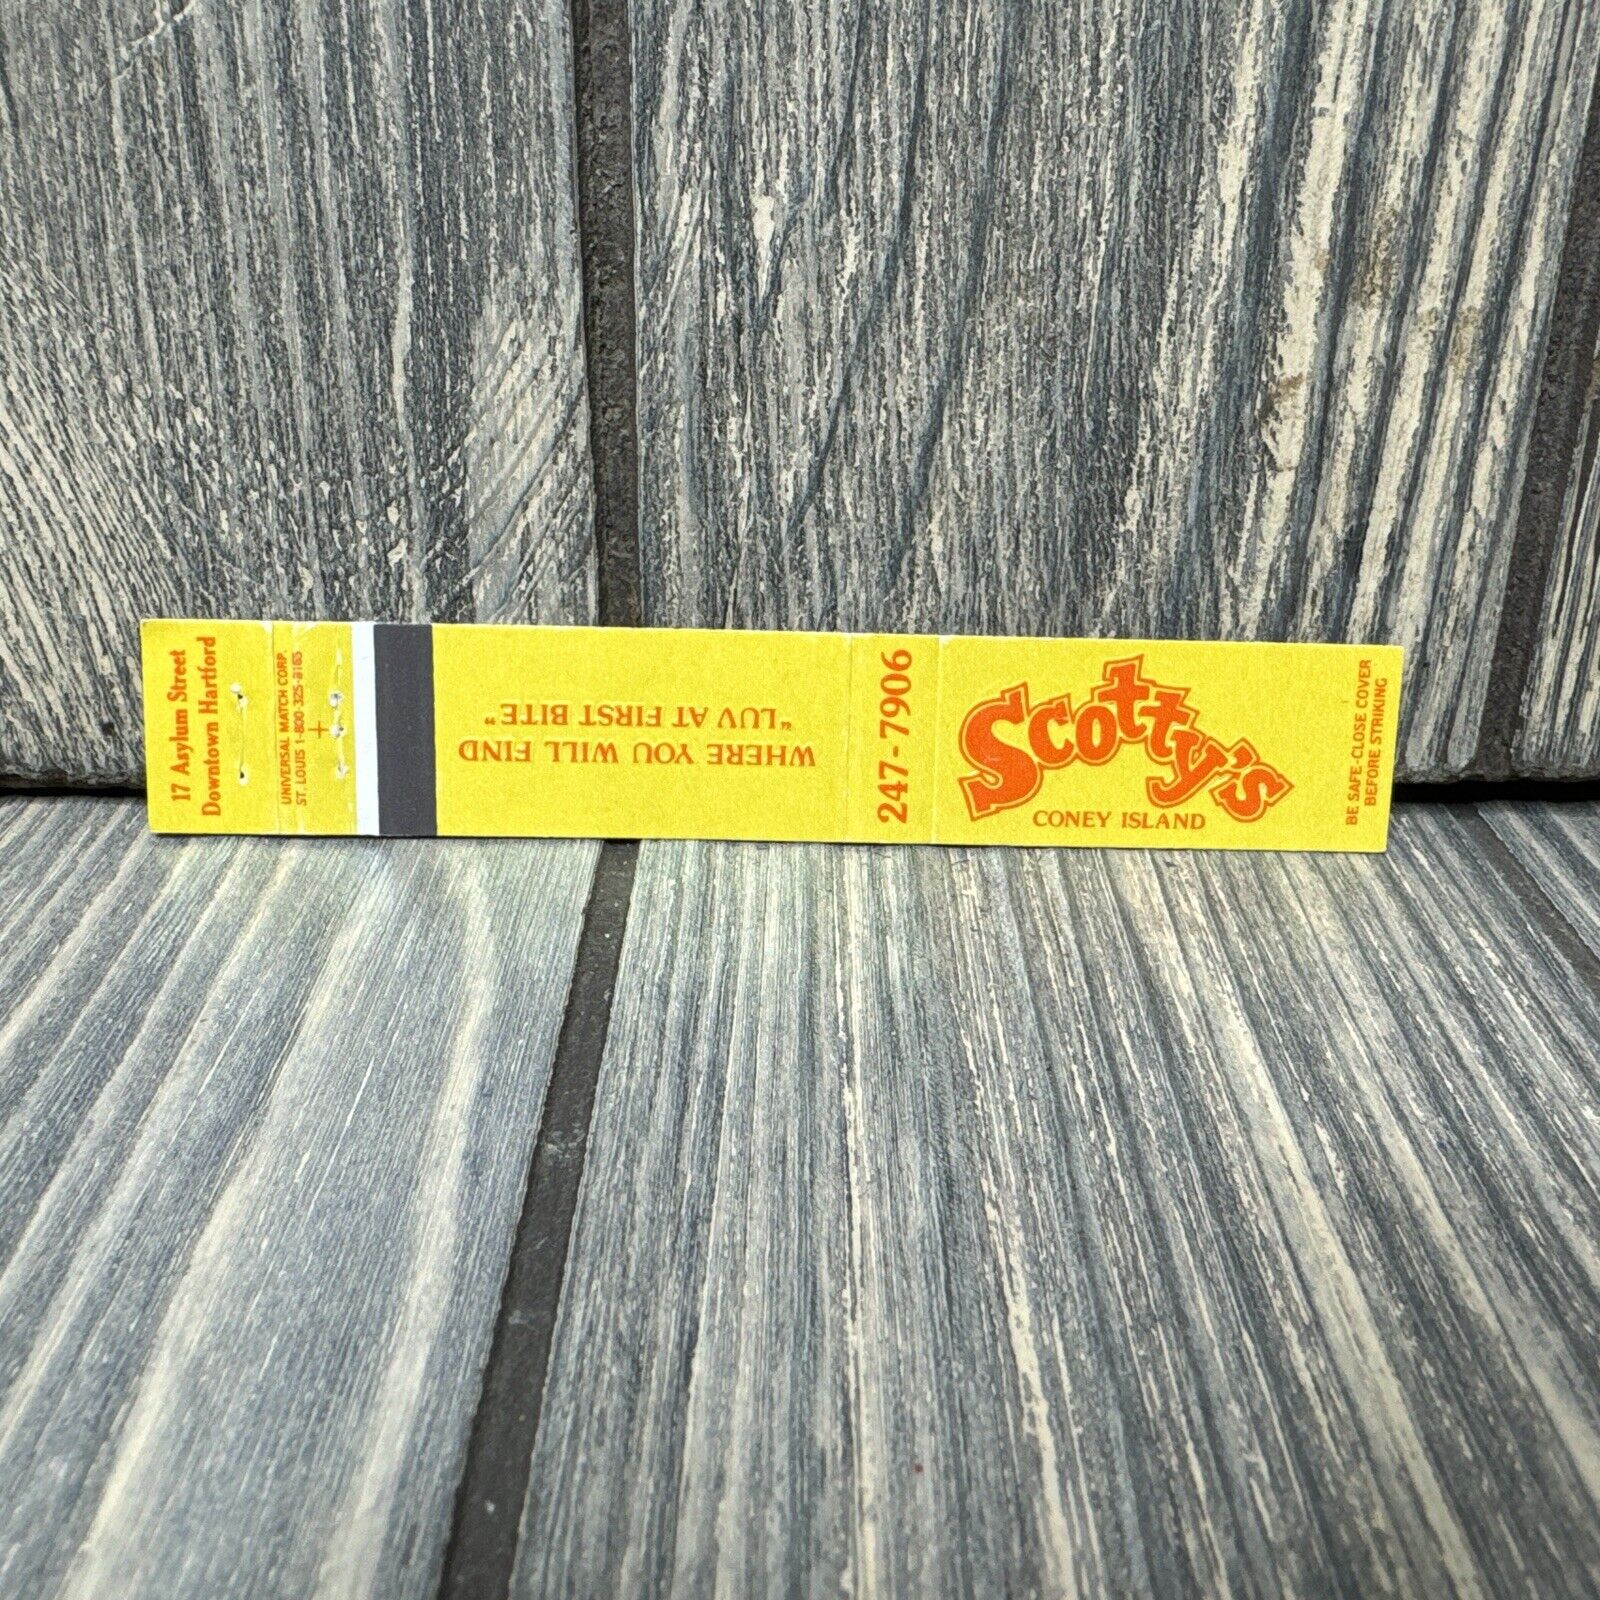 Vintage Scotty’s Coney Island Matchbook Cover Advertisement  